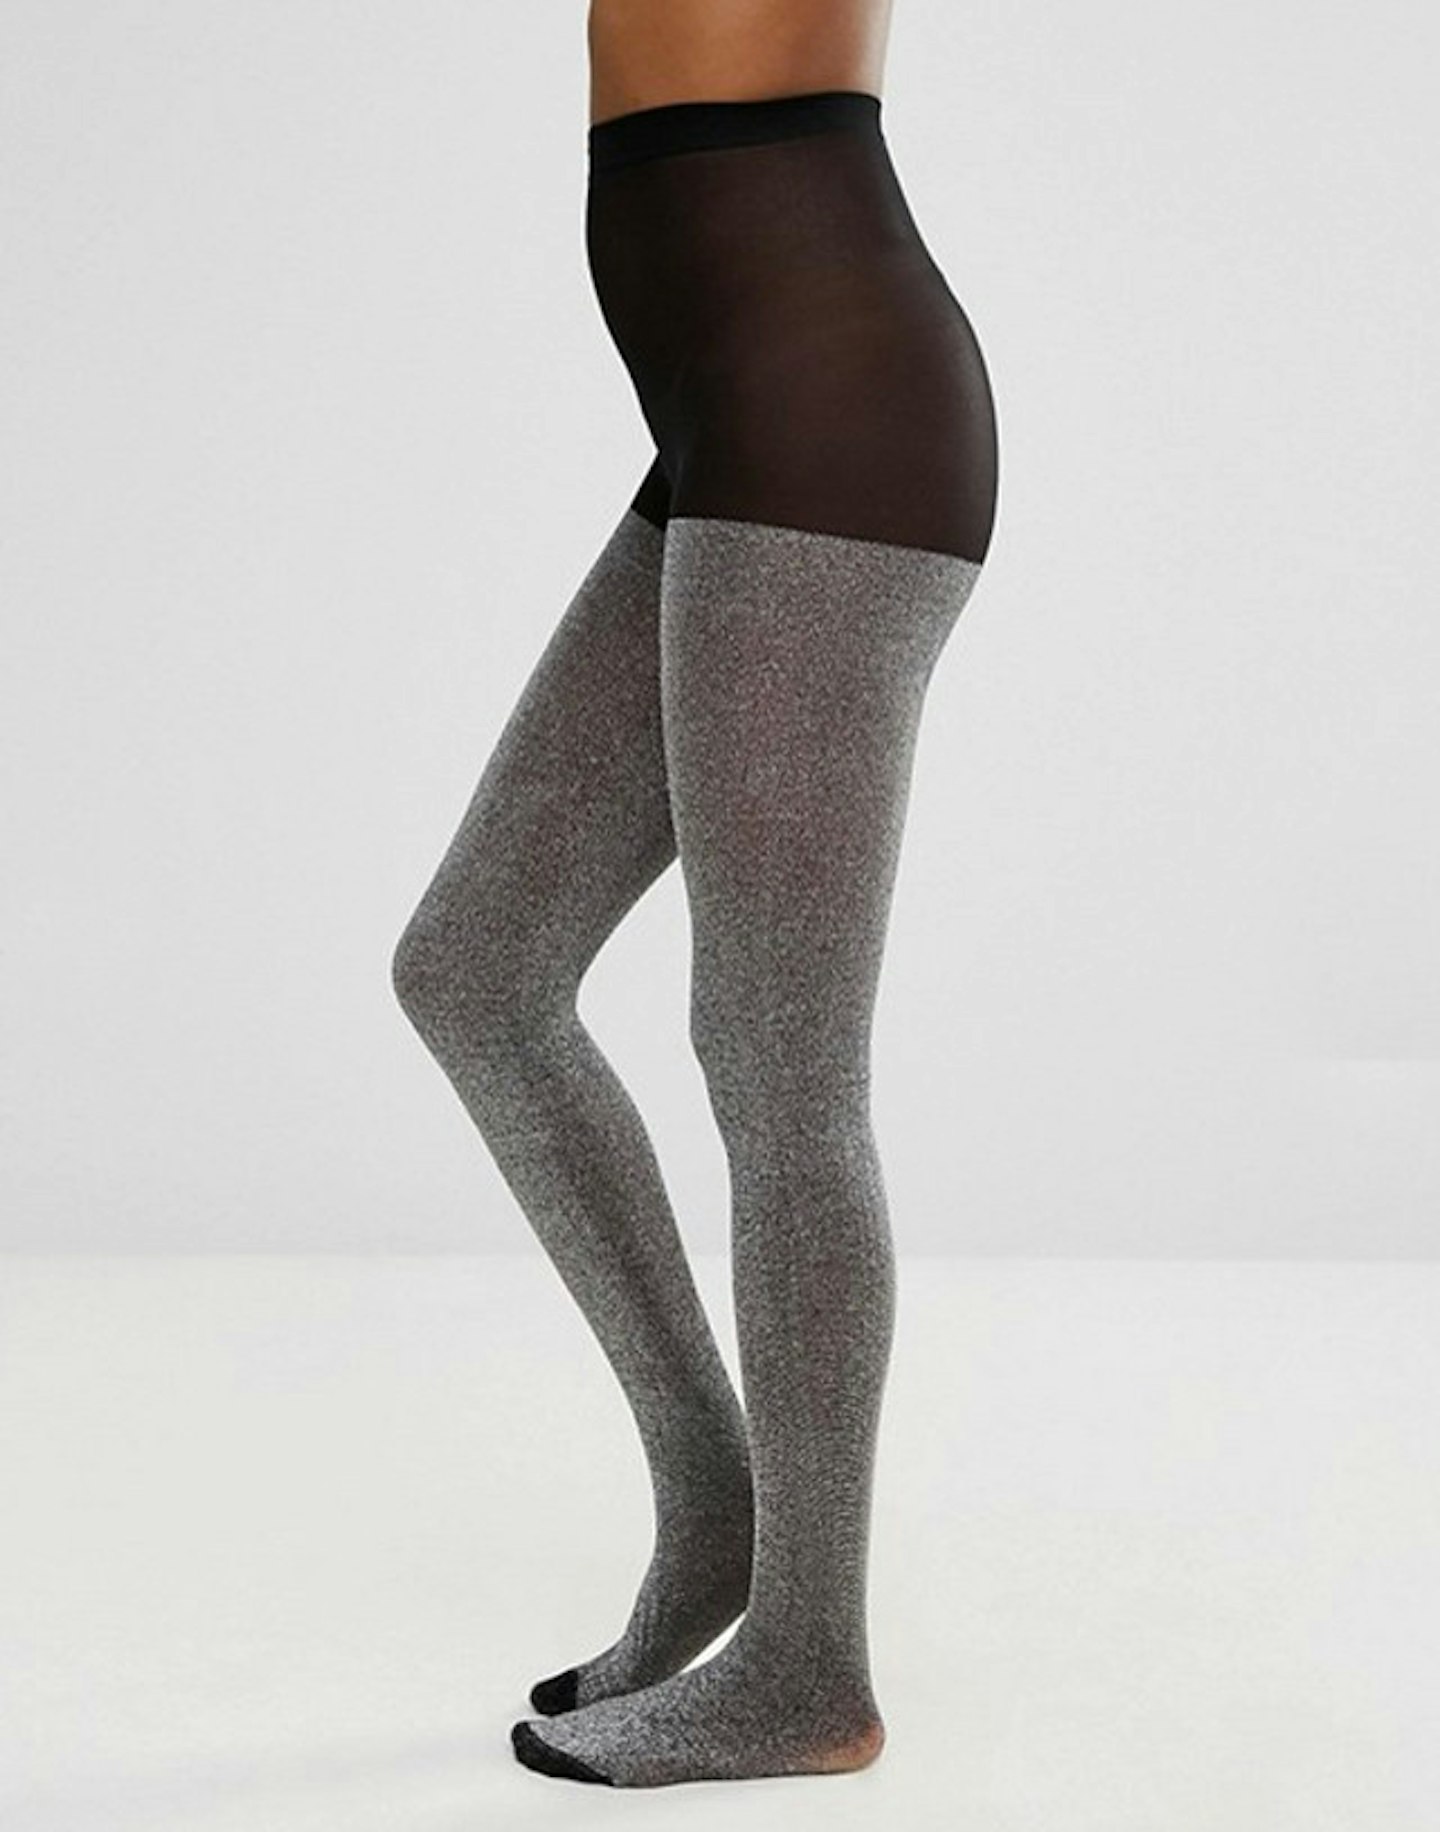 9 Pairs Of Tights That Aren't Black Opaques For £9 Or Less